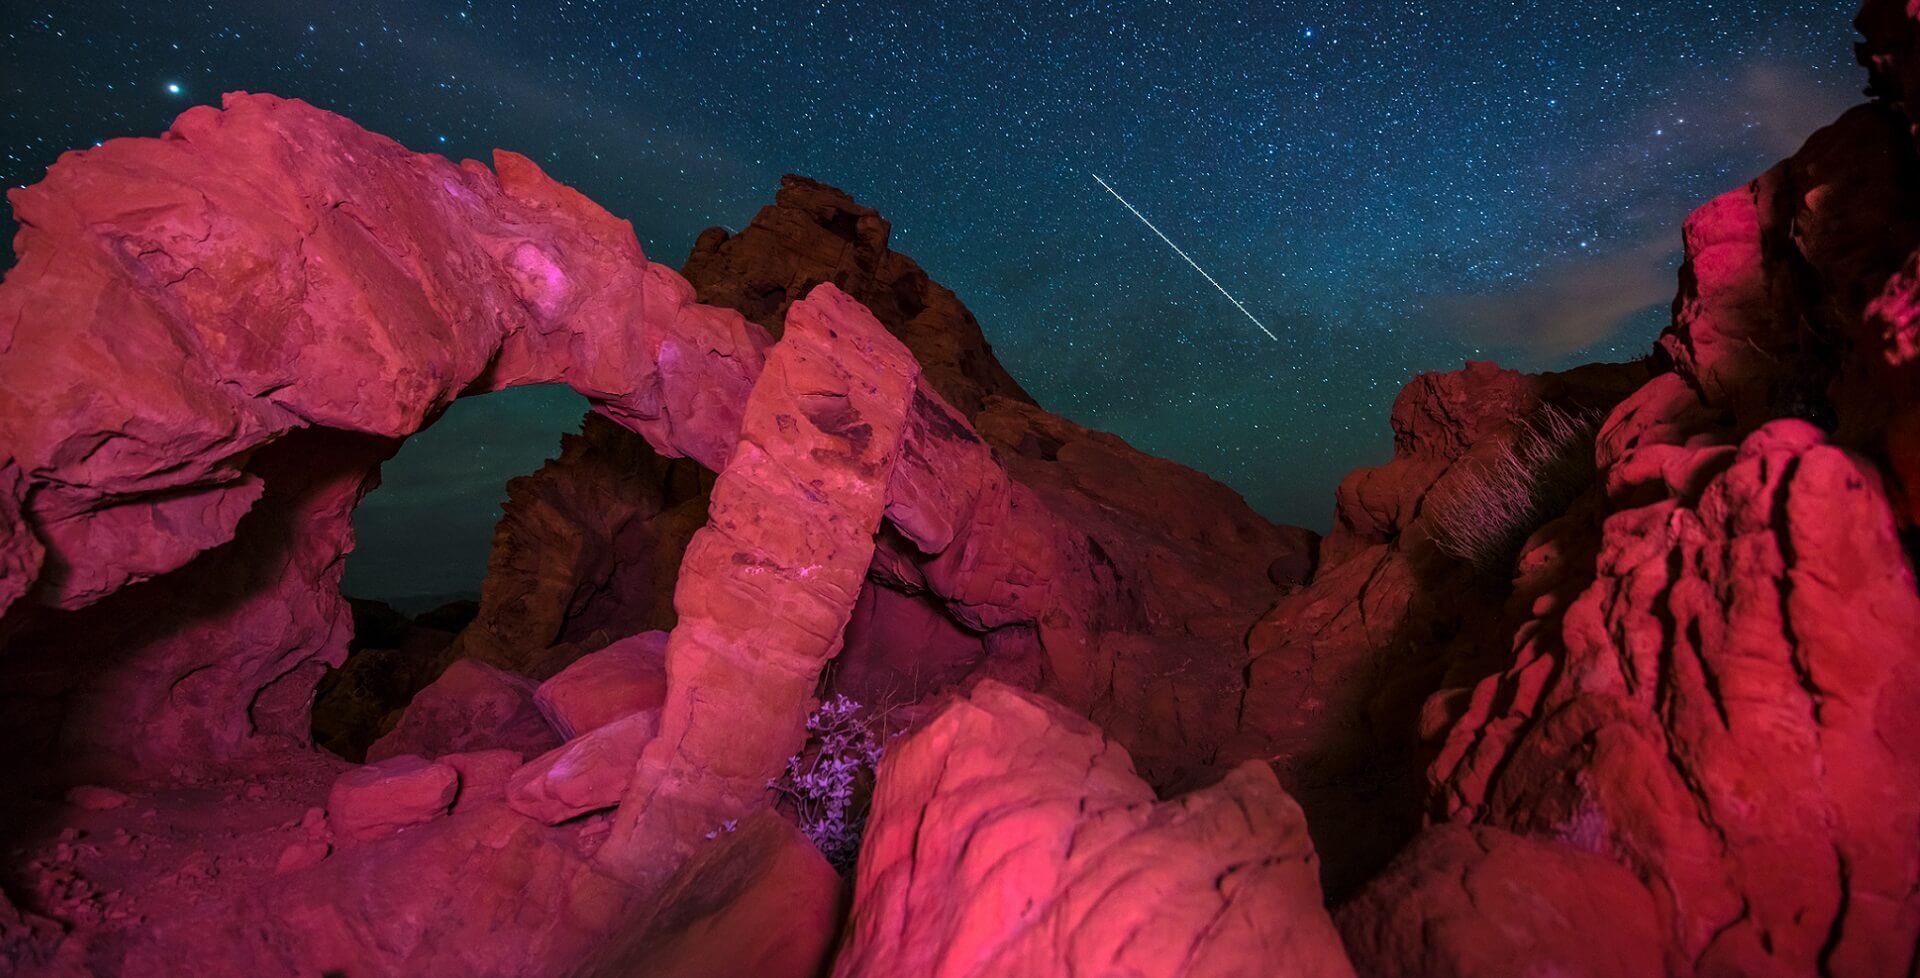 Beautiful rock formations against bright starry sky at night. Valley of Fire Overton Nevada USA